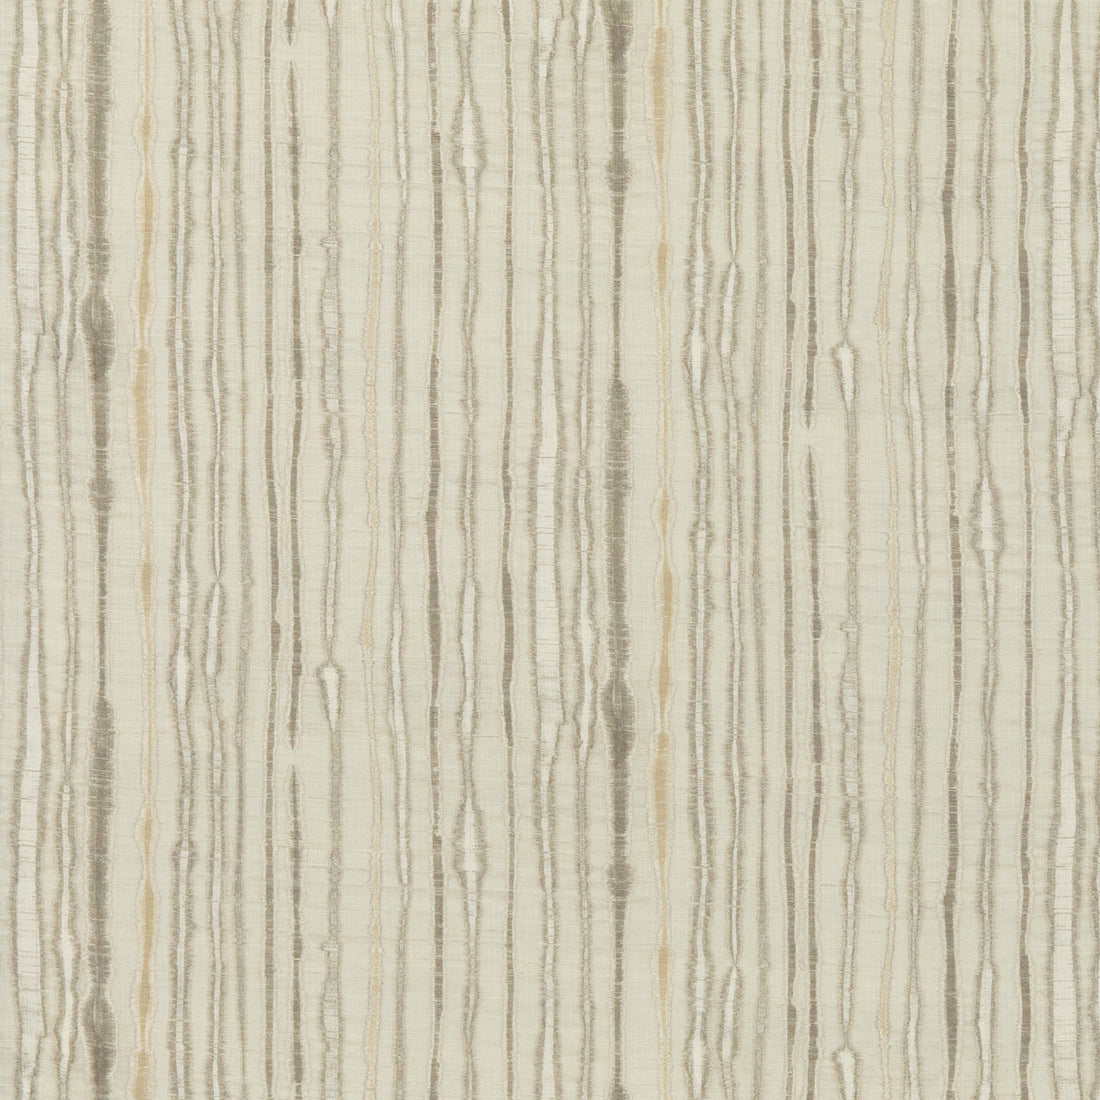 Linear fabric in ivory color - pattern ED75038.3.0 - by Threads in the Nala Prints collection